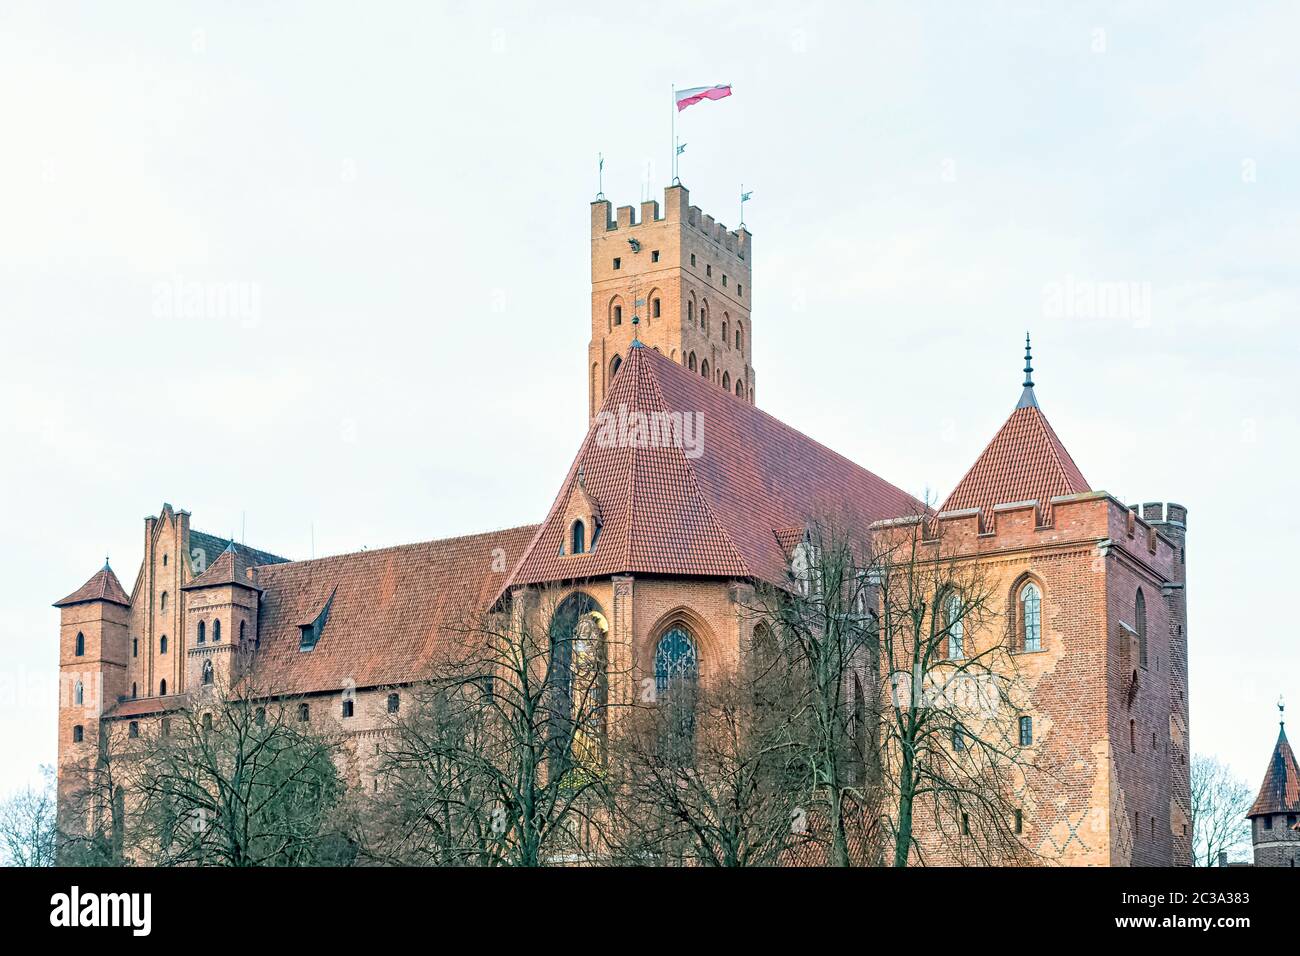 Castle of the Teutonic Order in Malbork - the largest castle in the world by land area in Malbork, Pomerania, Poland Stock Photo